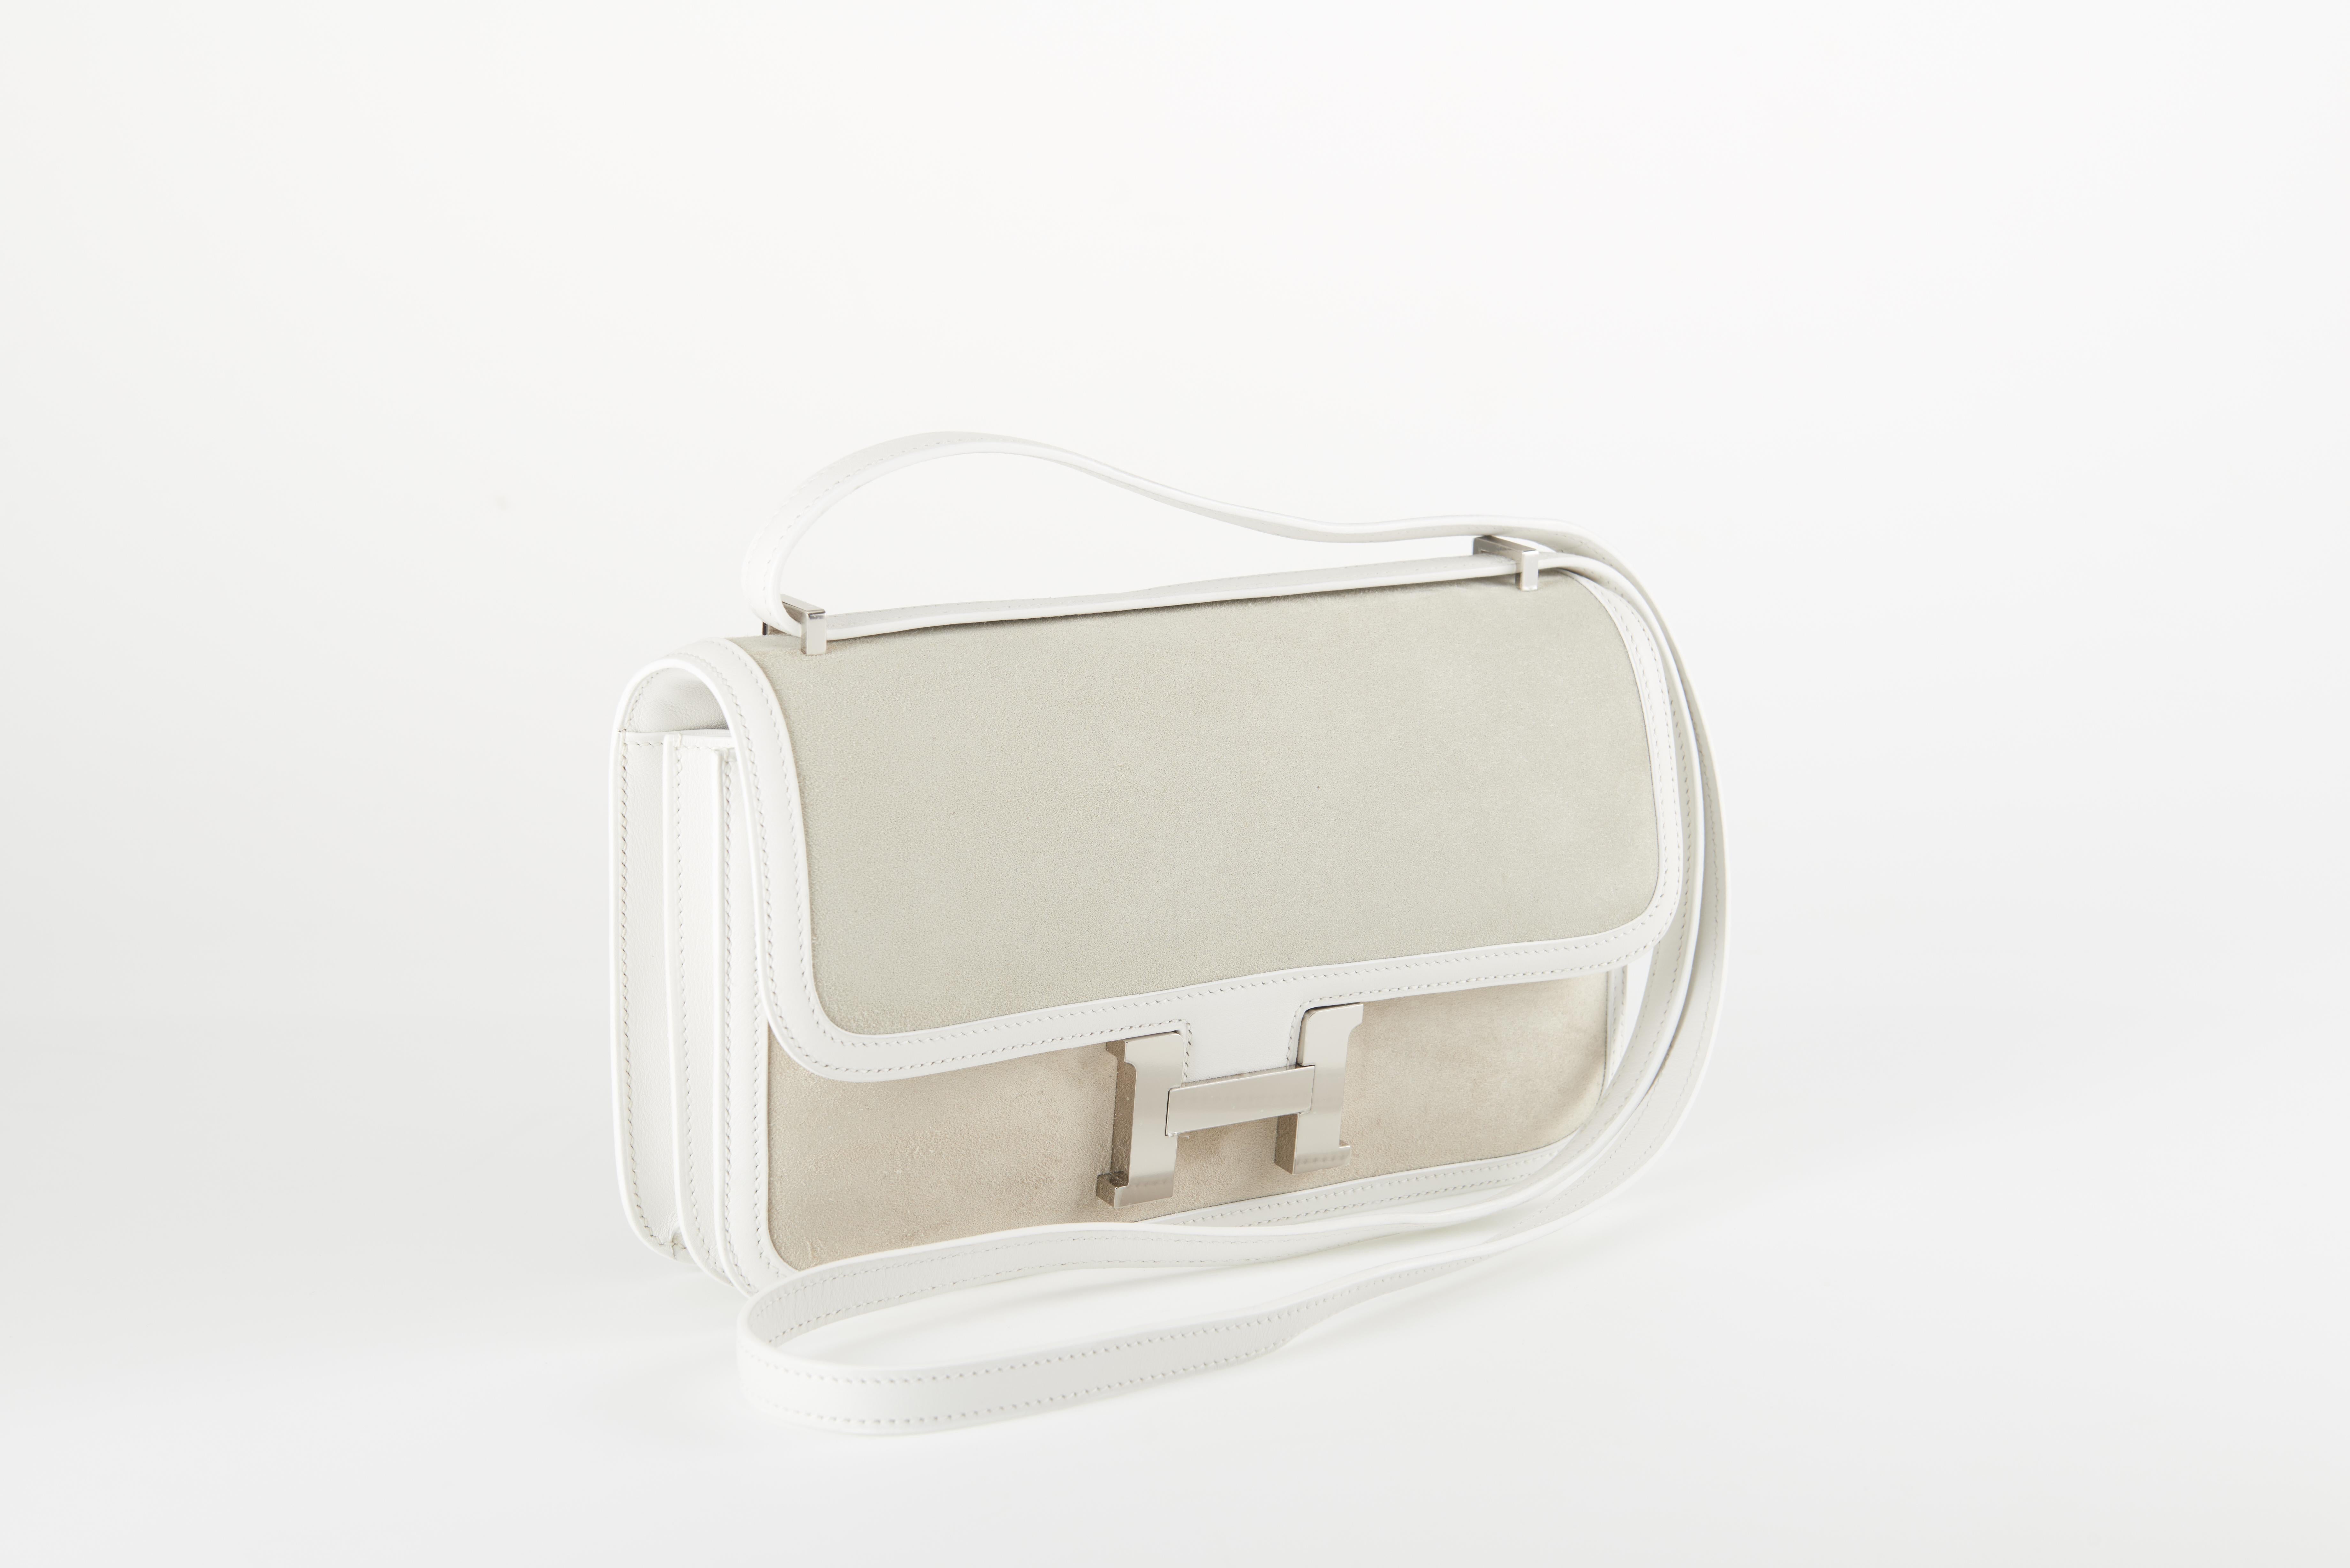 Discontinued Hermes Constance Elan in white swift leather with galet suede insets and palladium hardware. 

Original packaging. 
